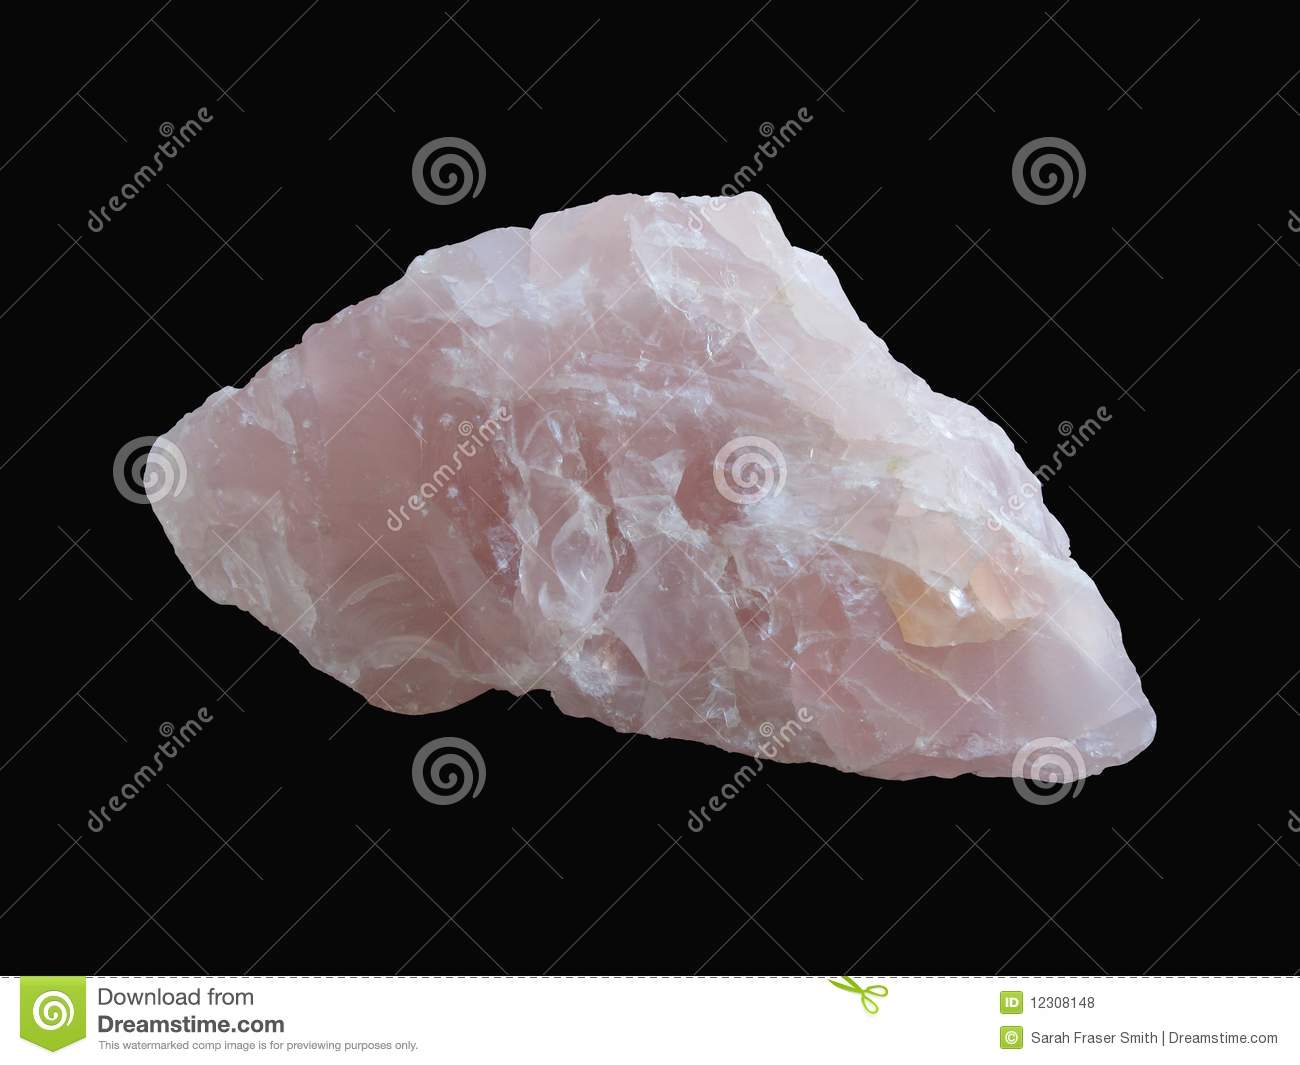 Rose Quartz In Natural State On Black Background Isolated